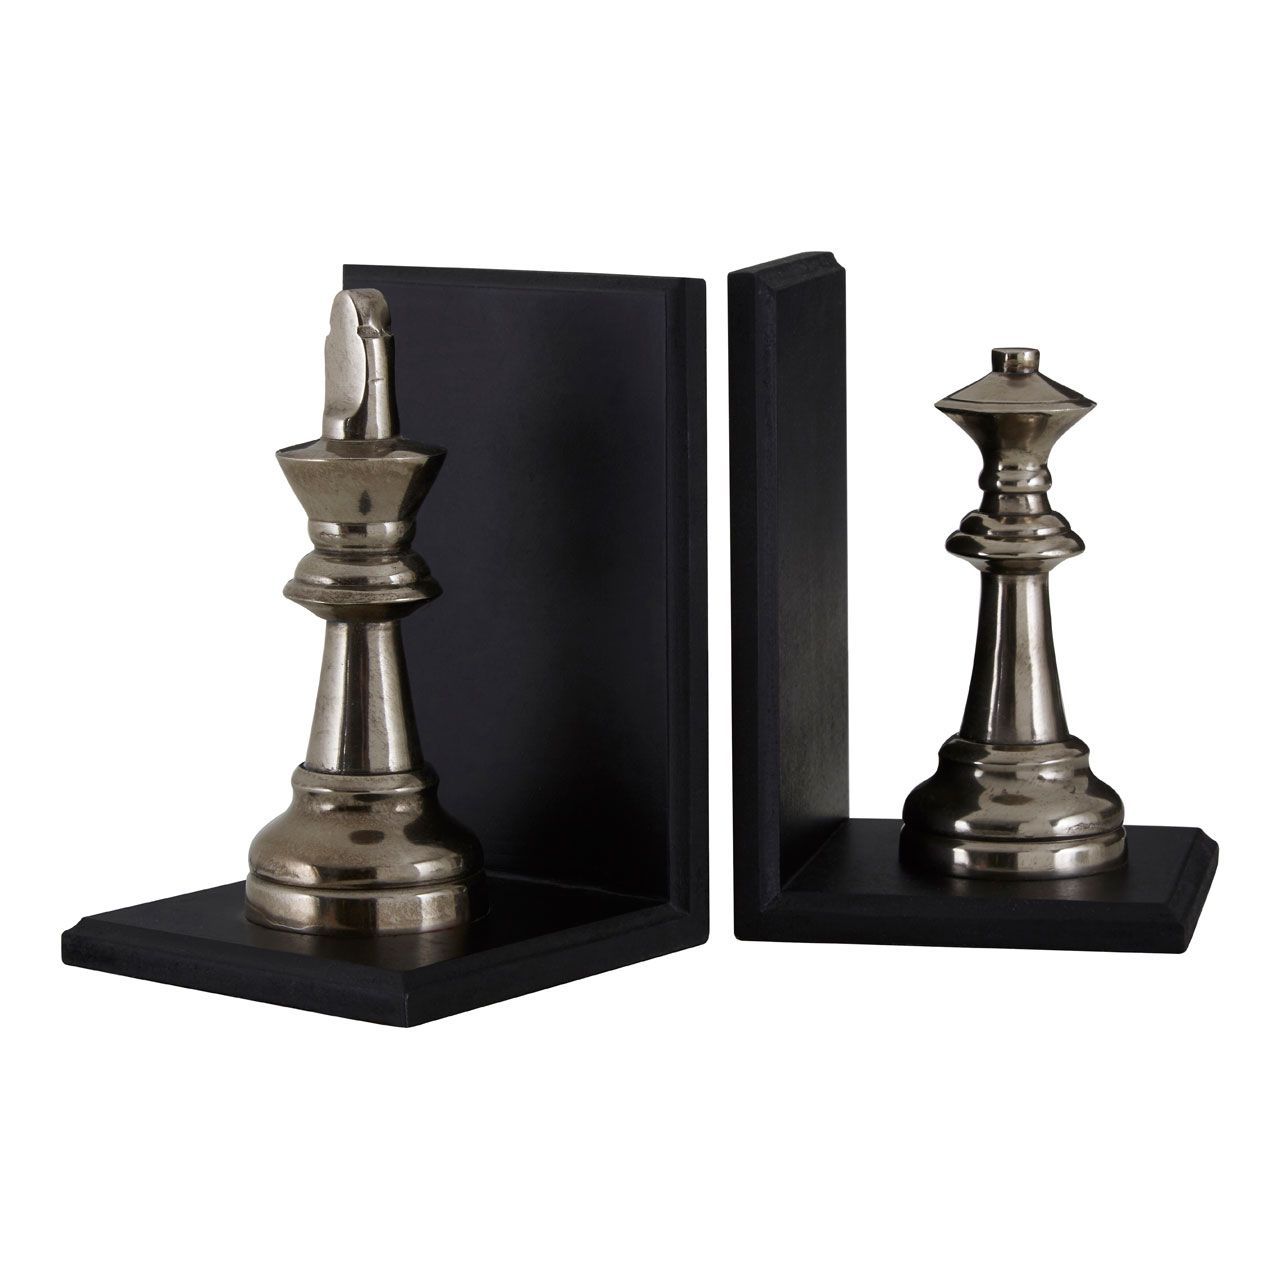 KING AND QUEEN CHESS BOOKENDS